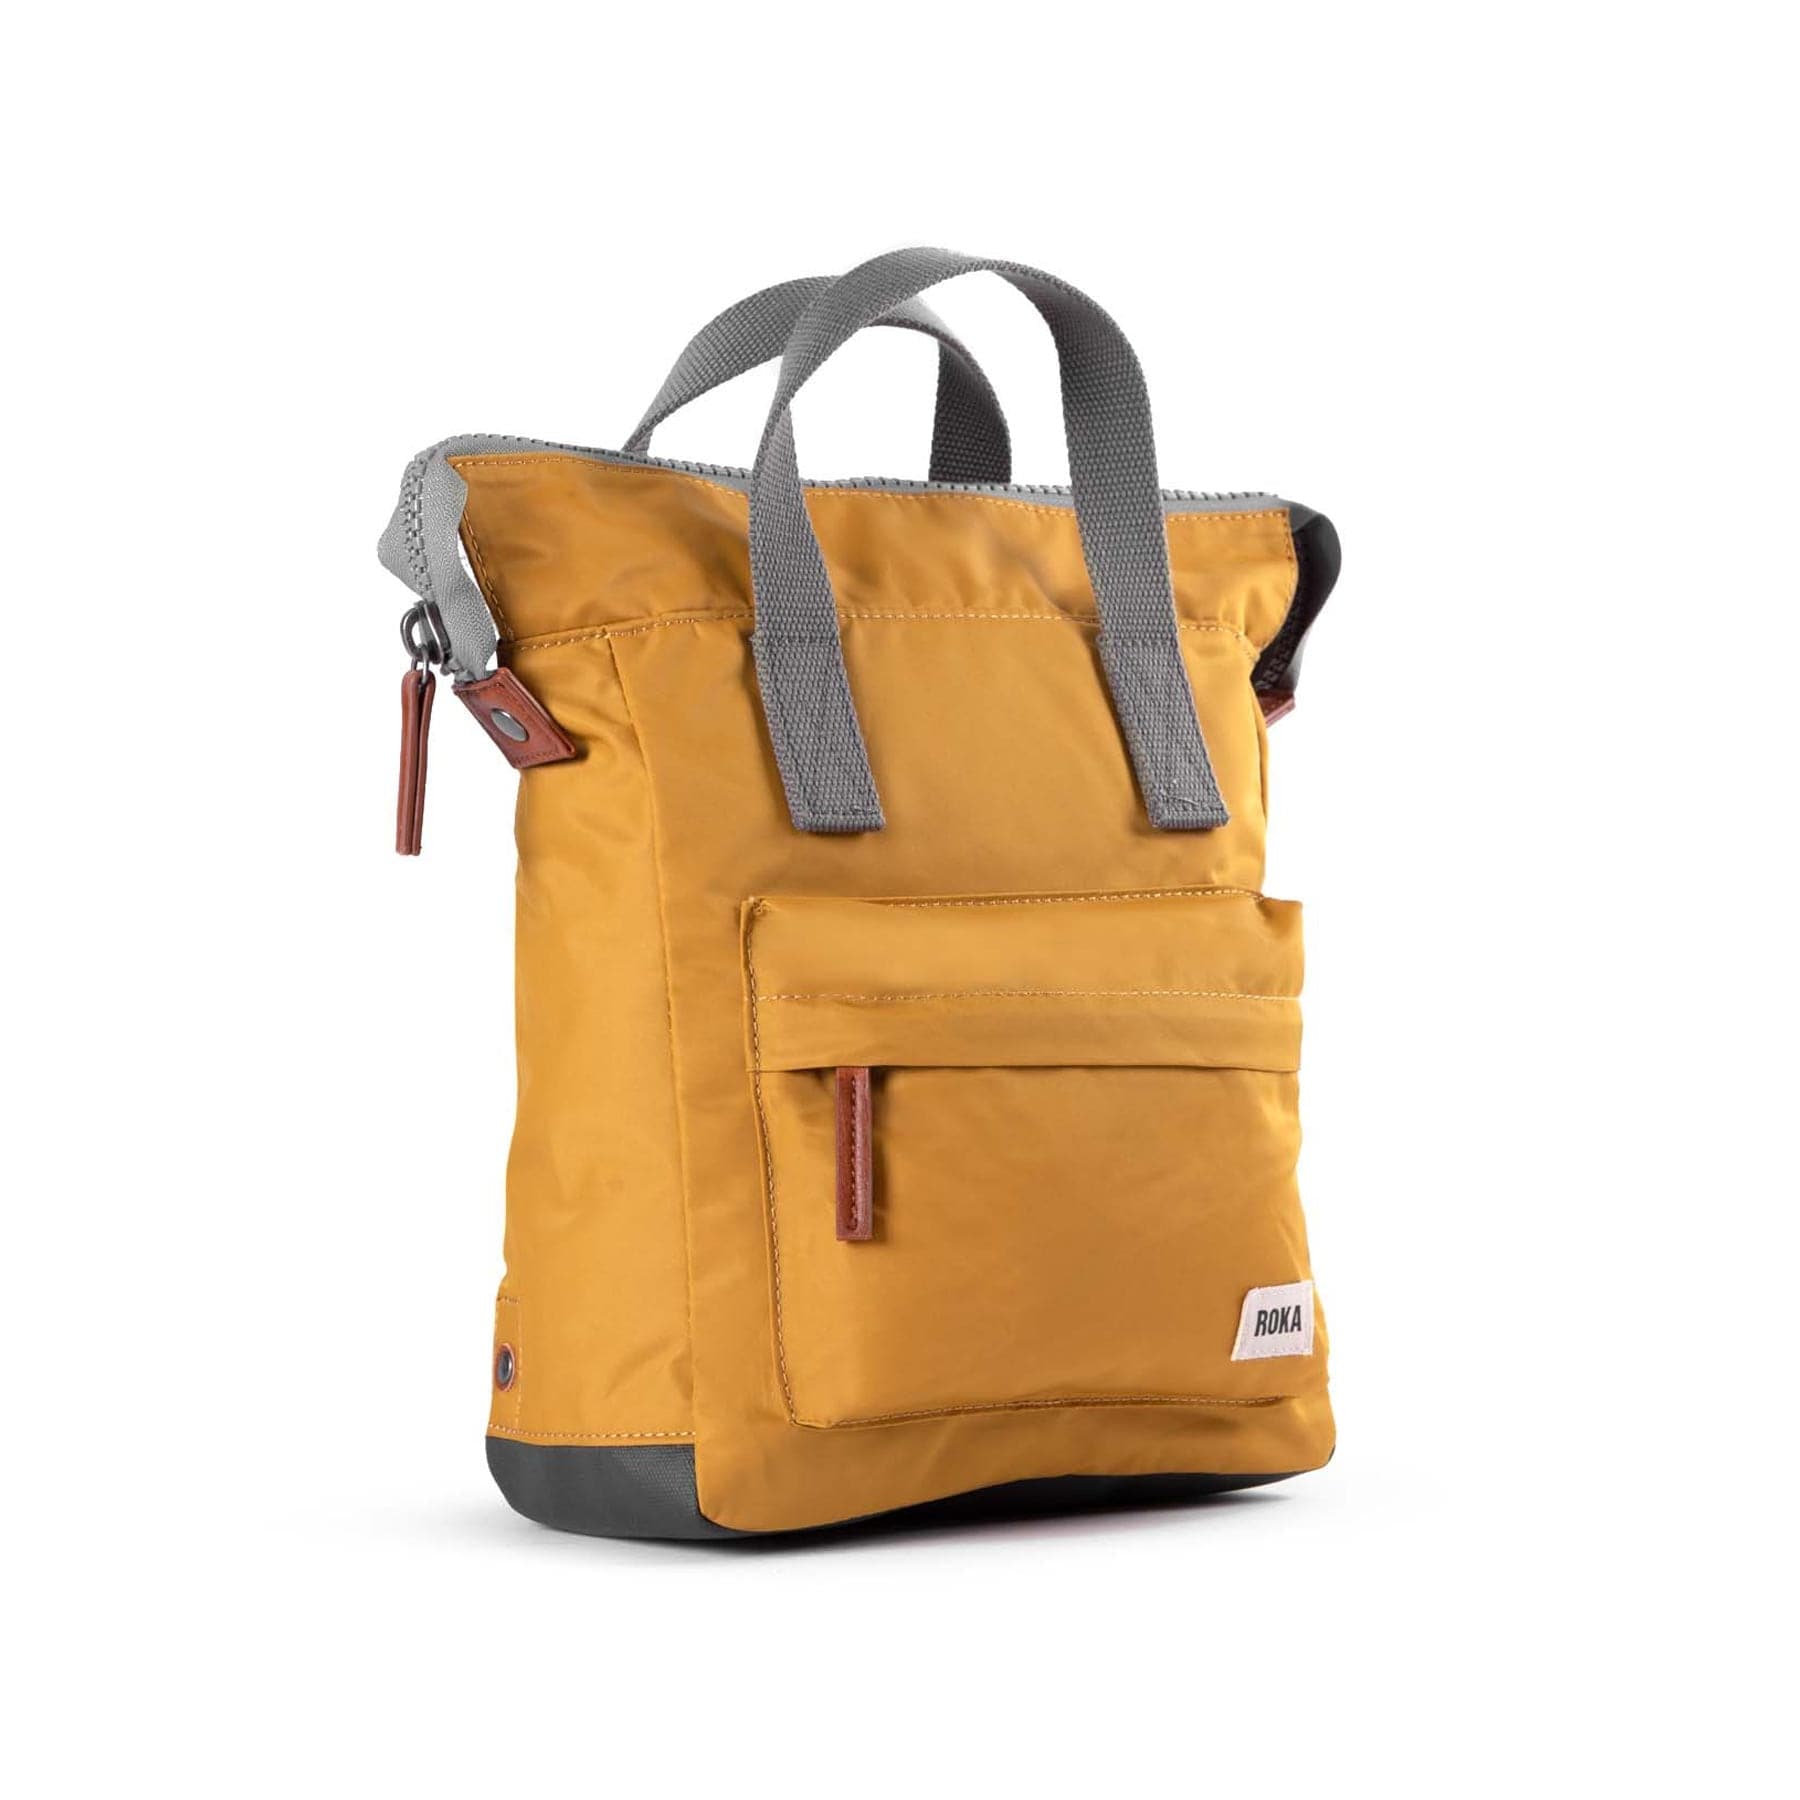 Bantry corn small backpack